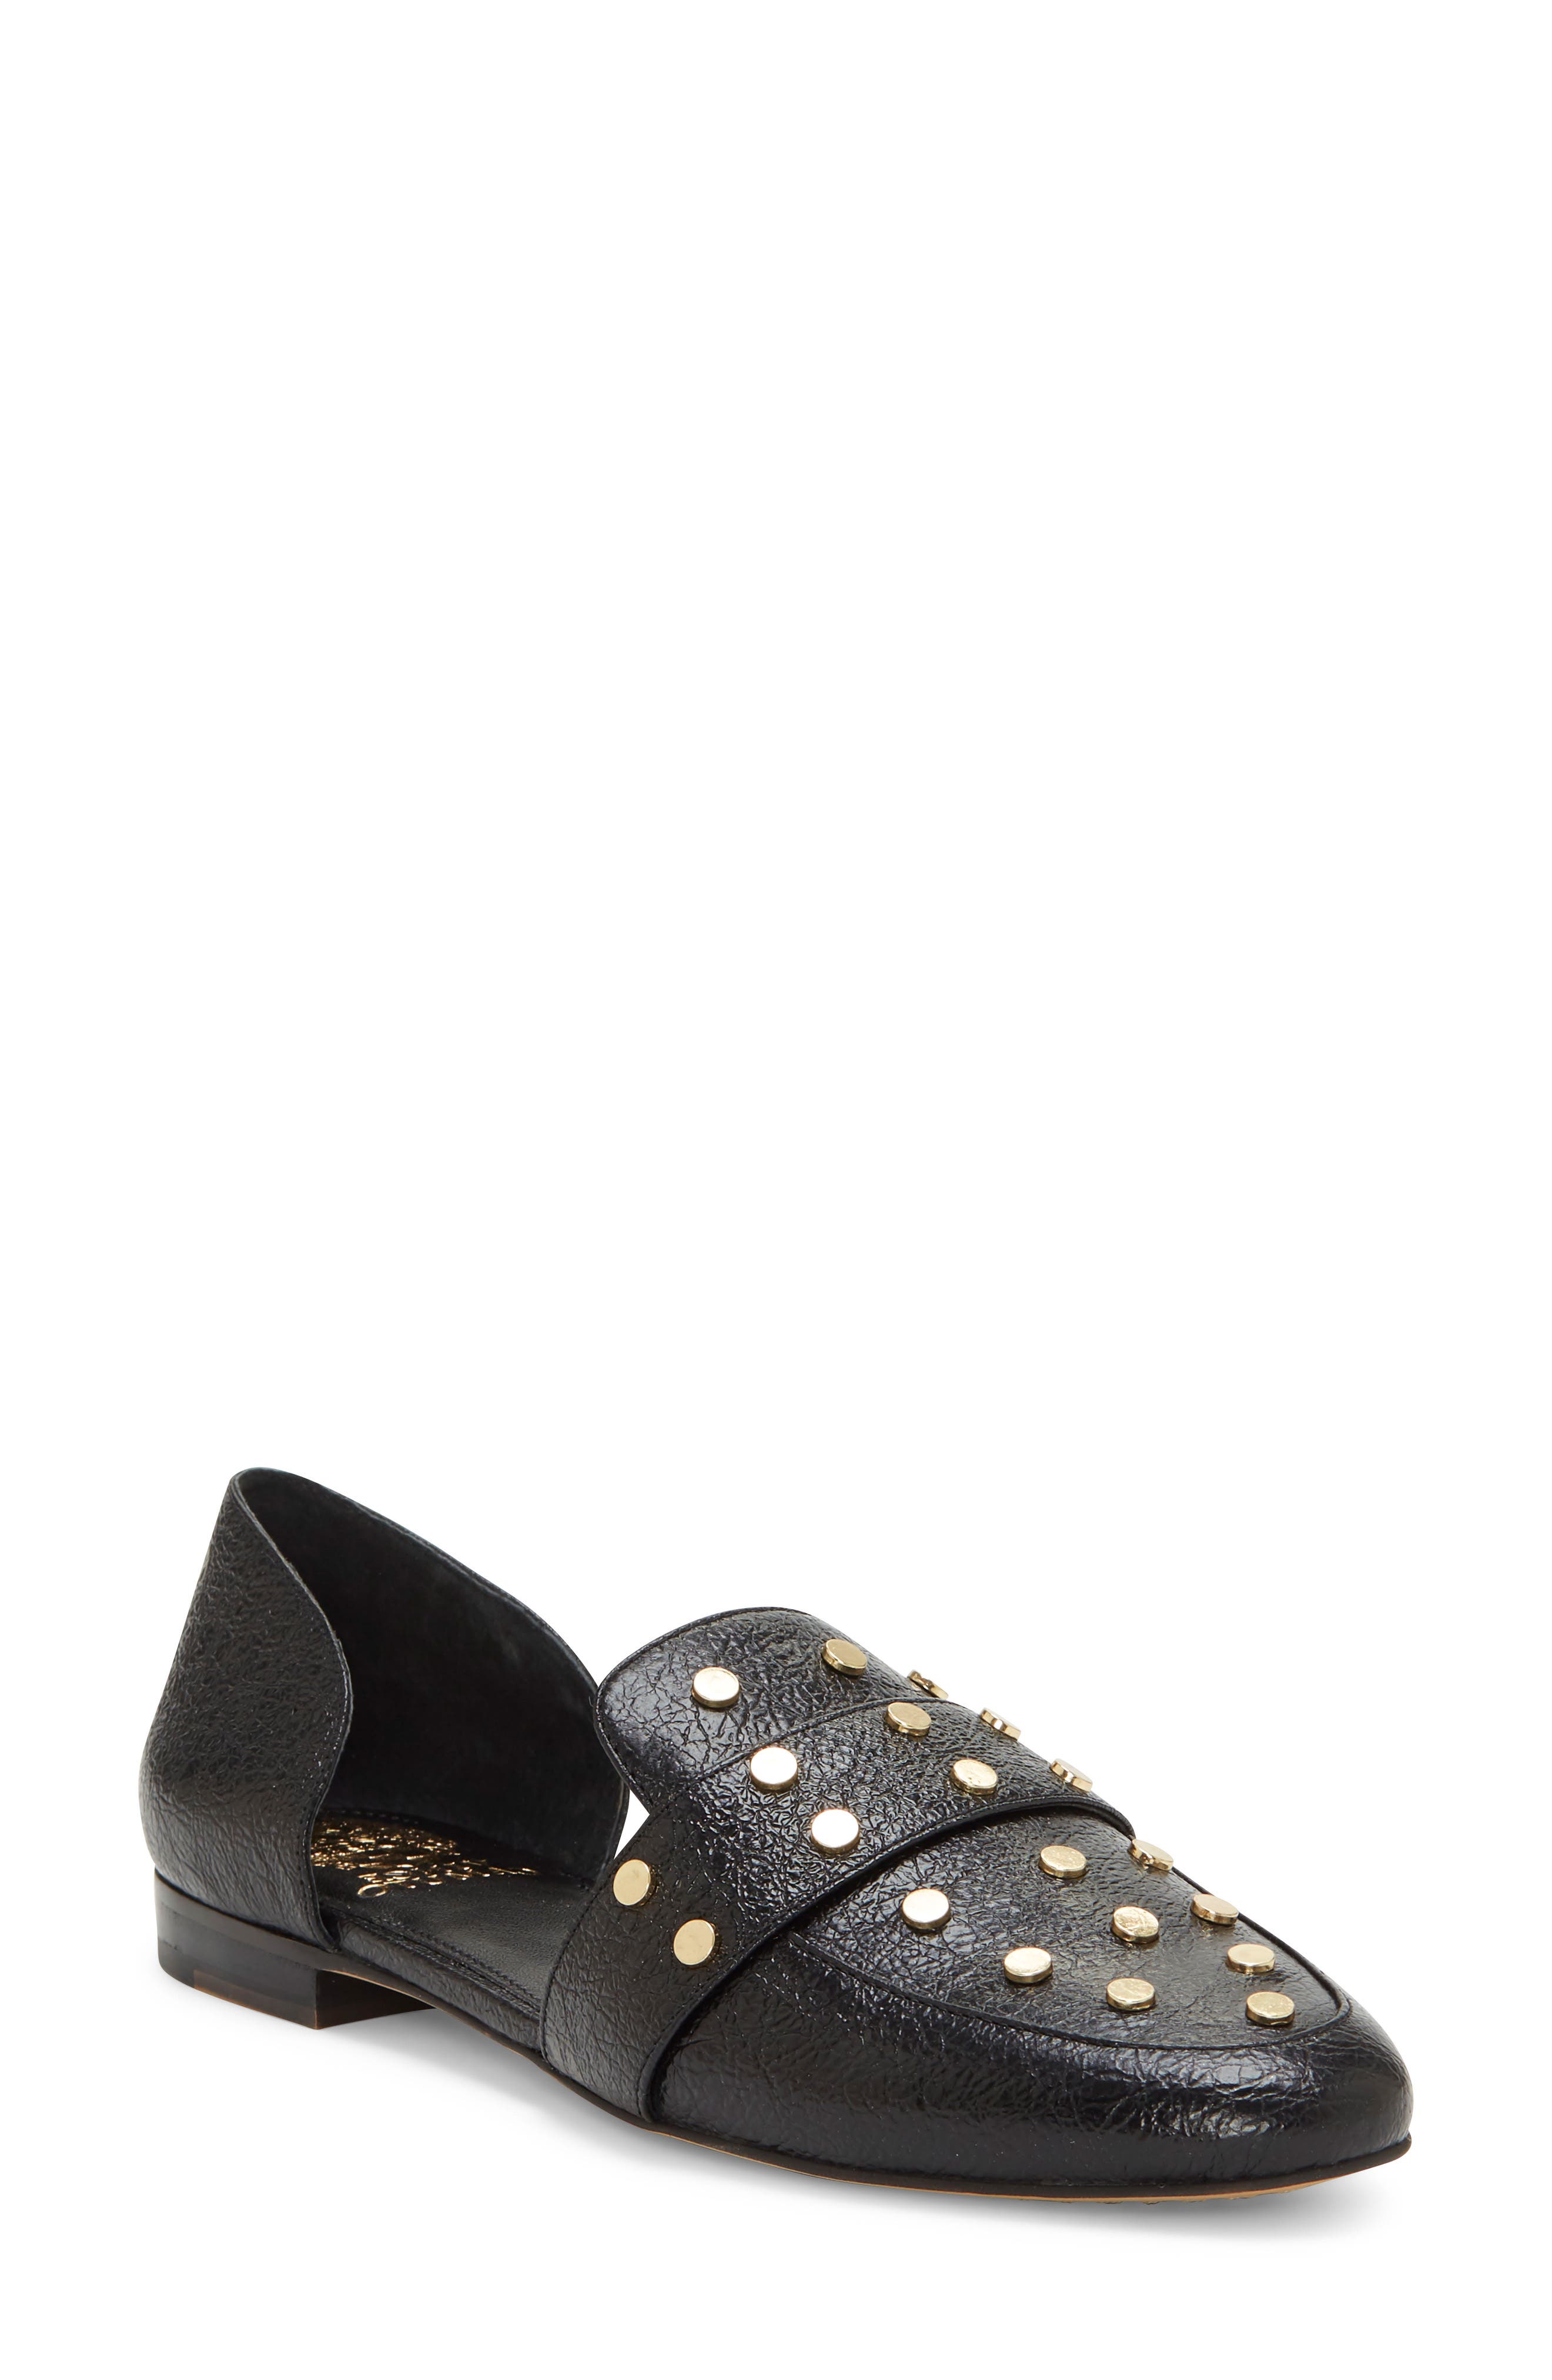 Vince Camuto | Wenerly d'Orsay Loafer 